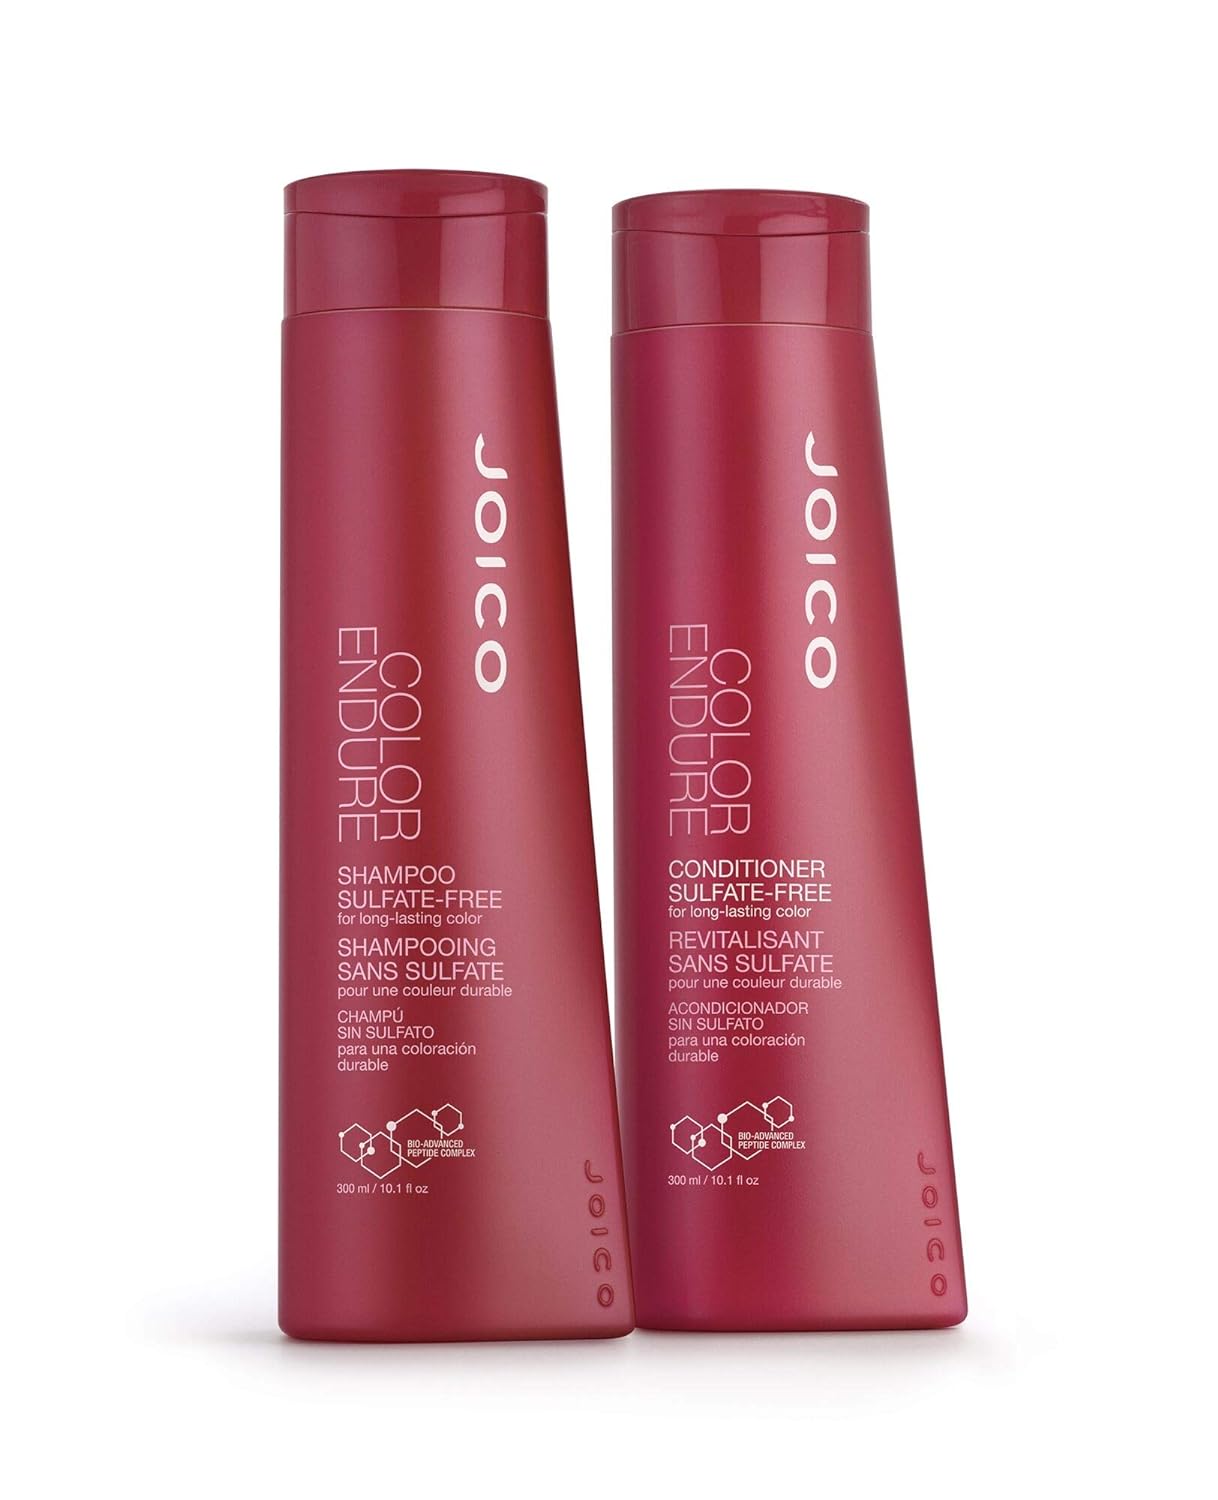  Joico Color Endure Shampoo For Long-Lasting Color | Reduce Tonal Change & Add Shine | Sulfate - Free | For Color-Treated Hair